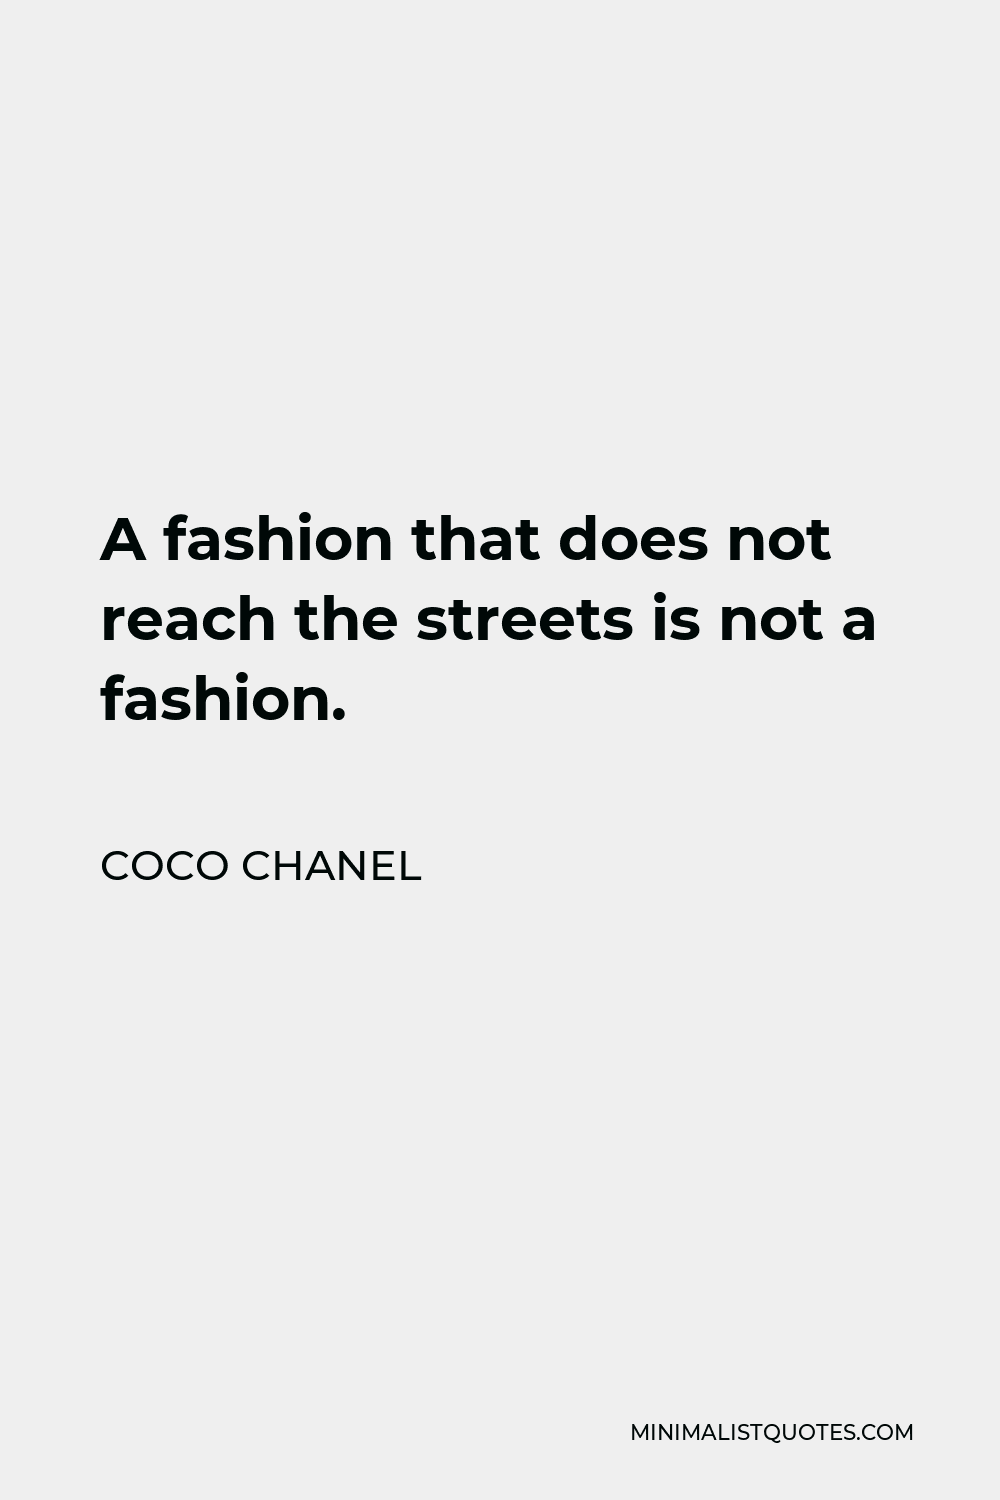 Coco Chanel Quote - A fashion that does not reach the streets is not a fashion.